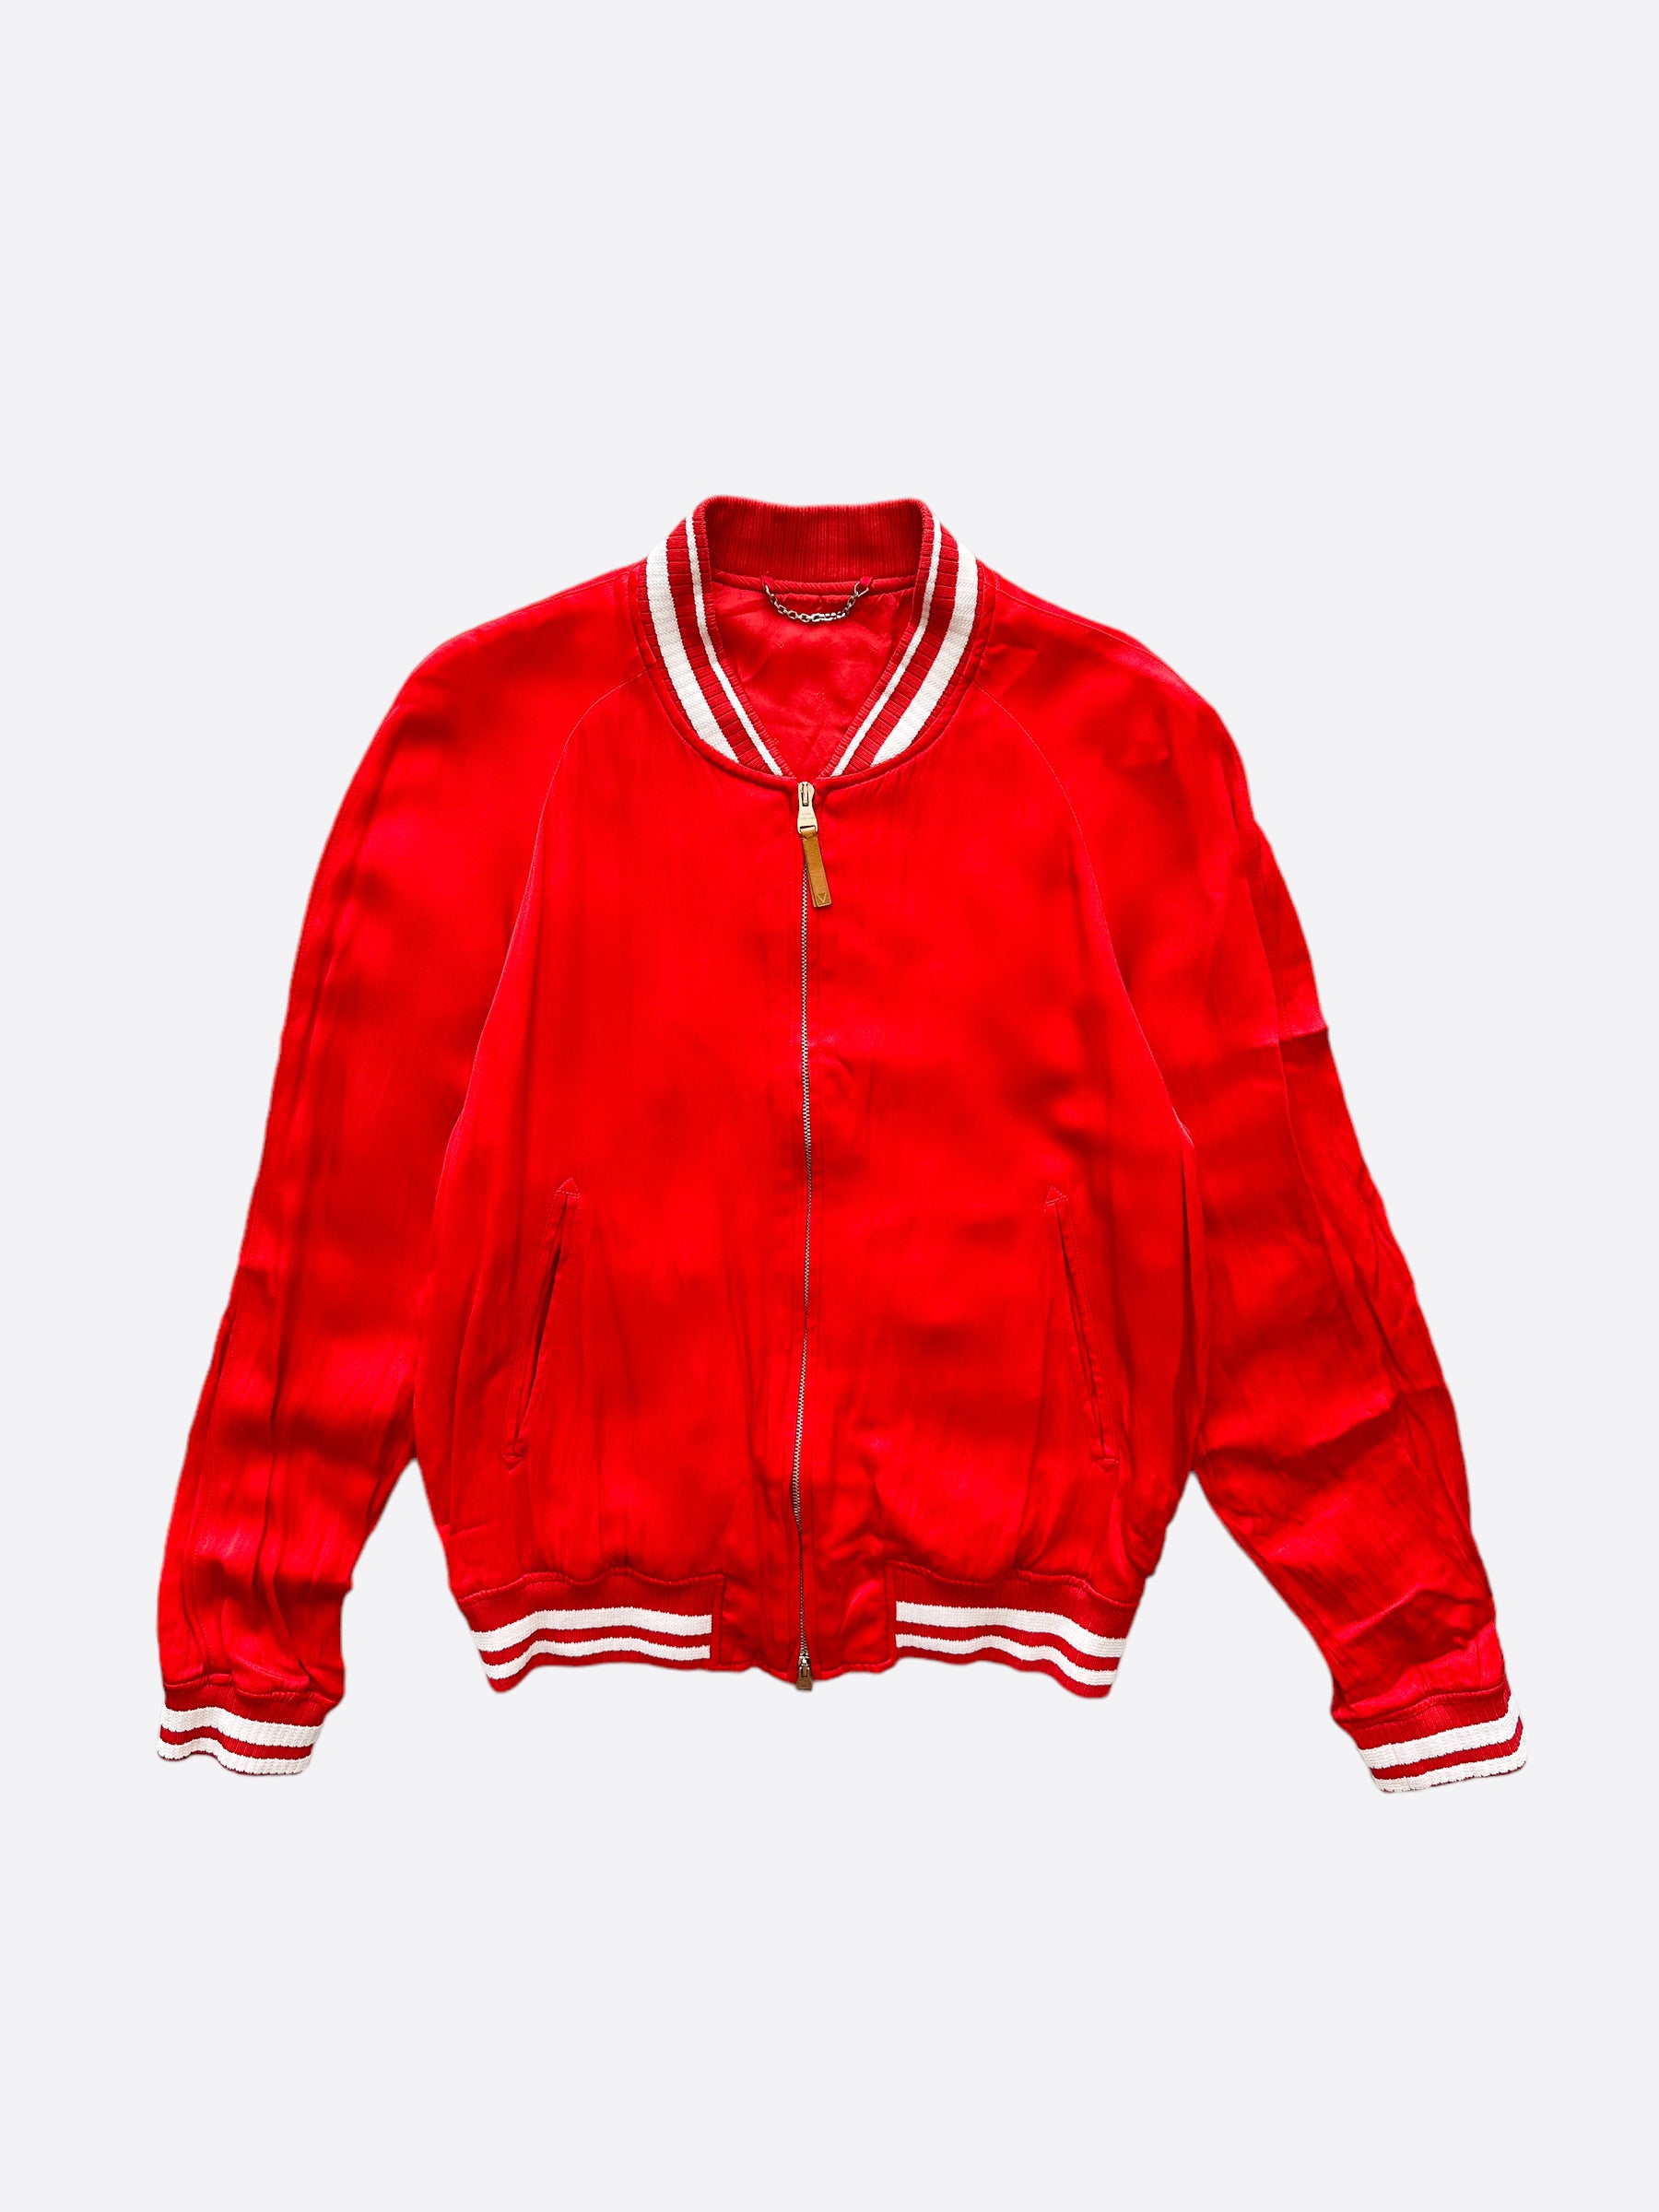 vuitton red jacket